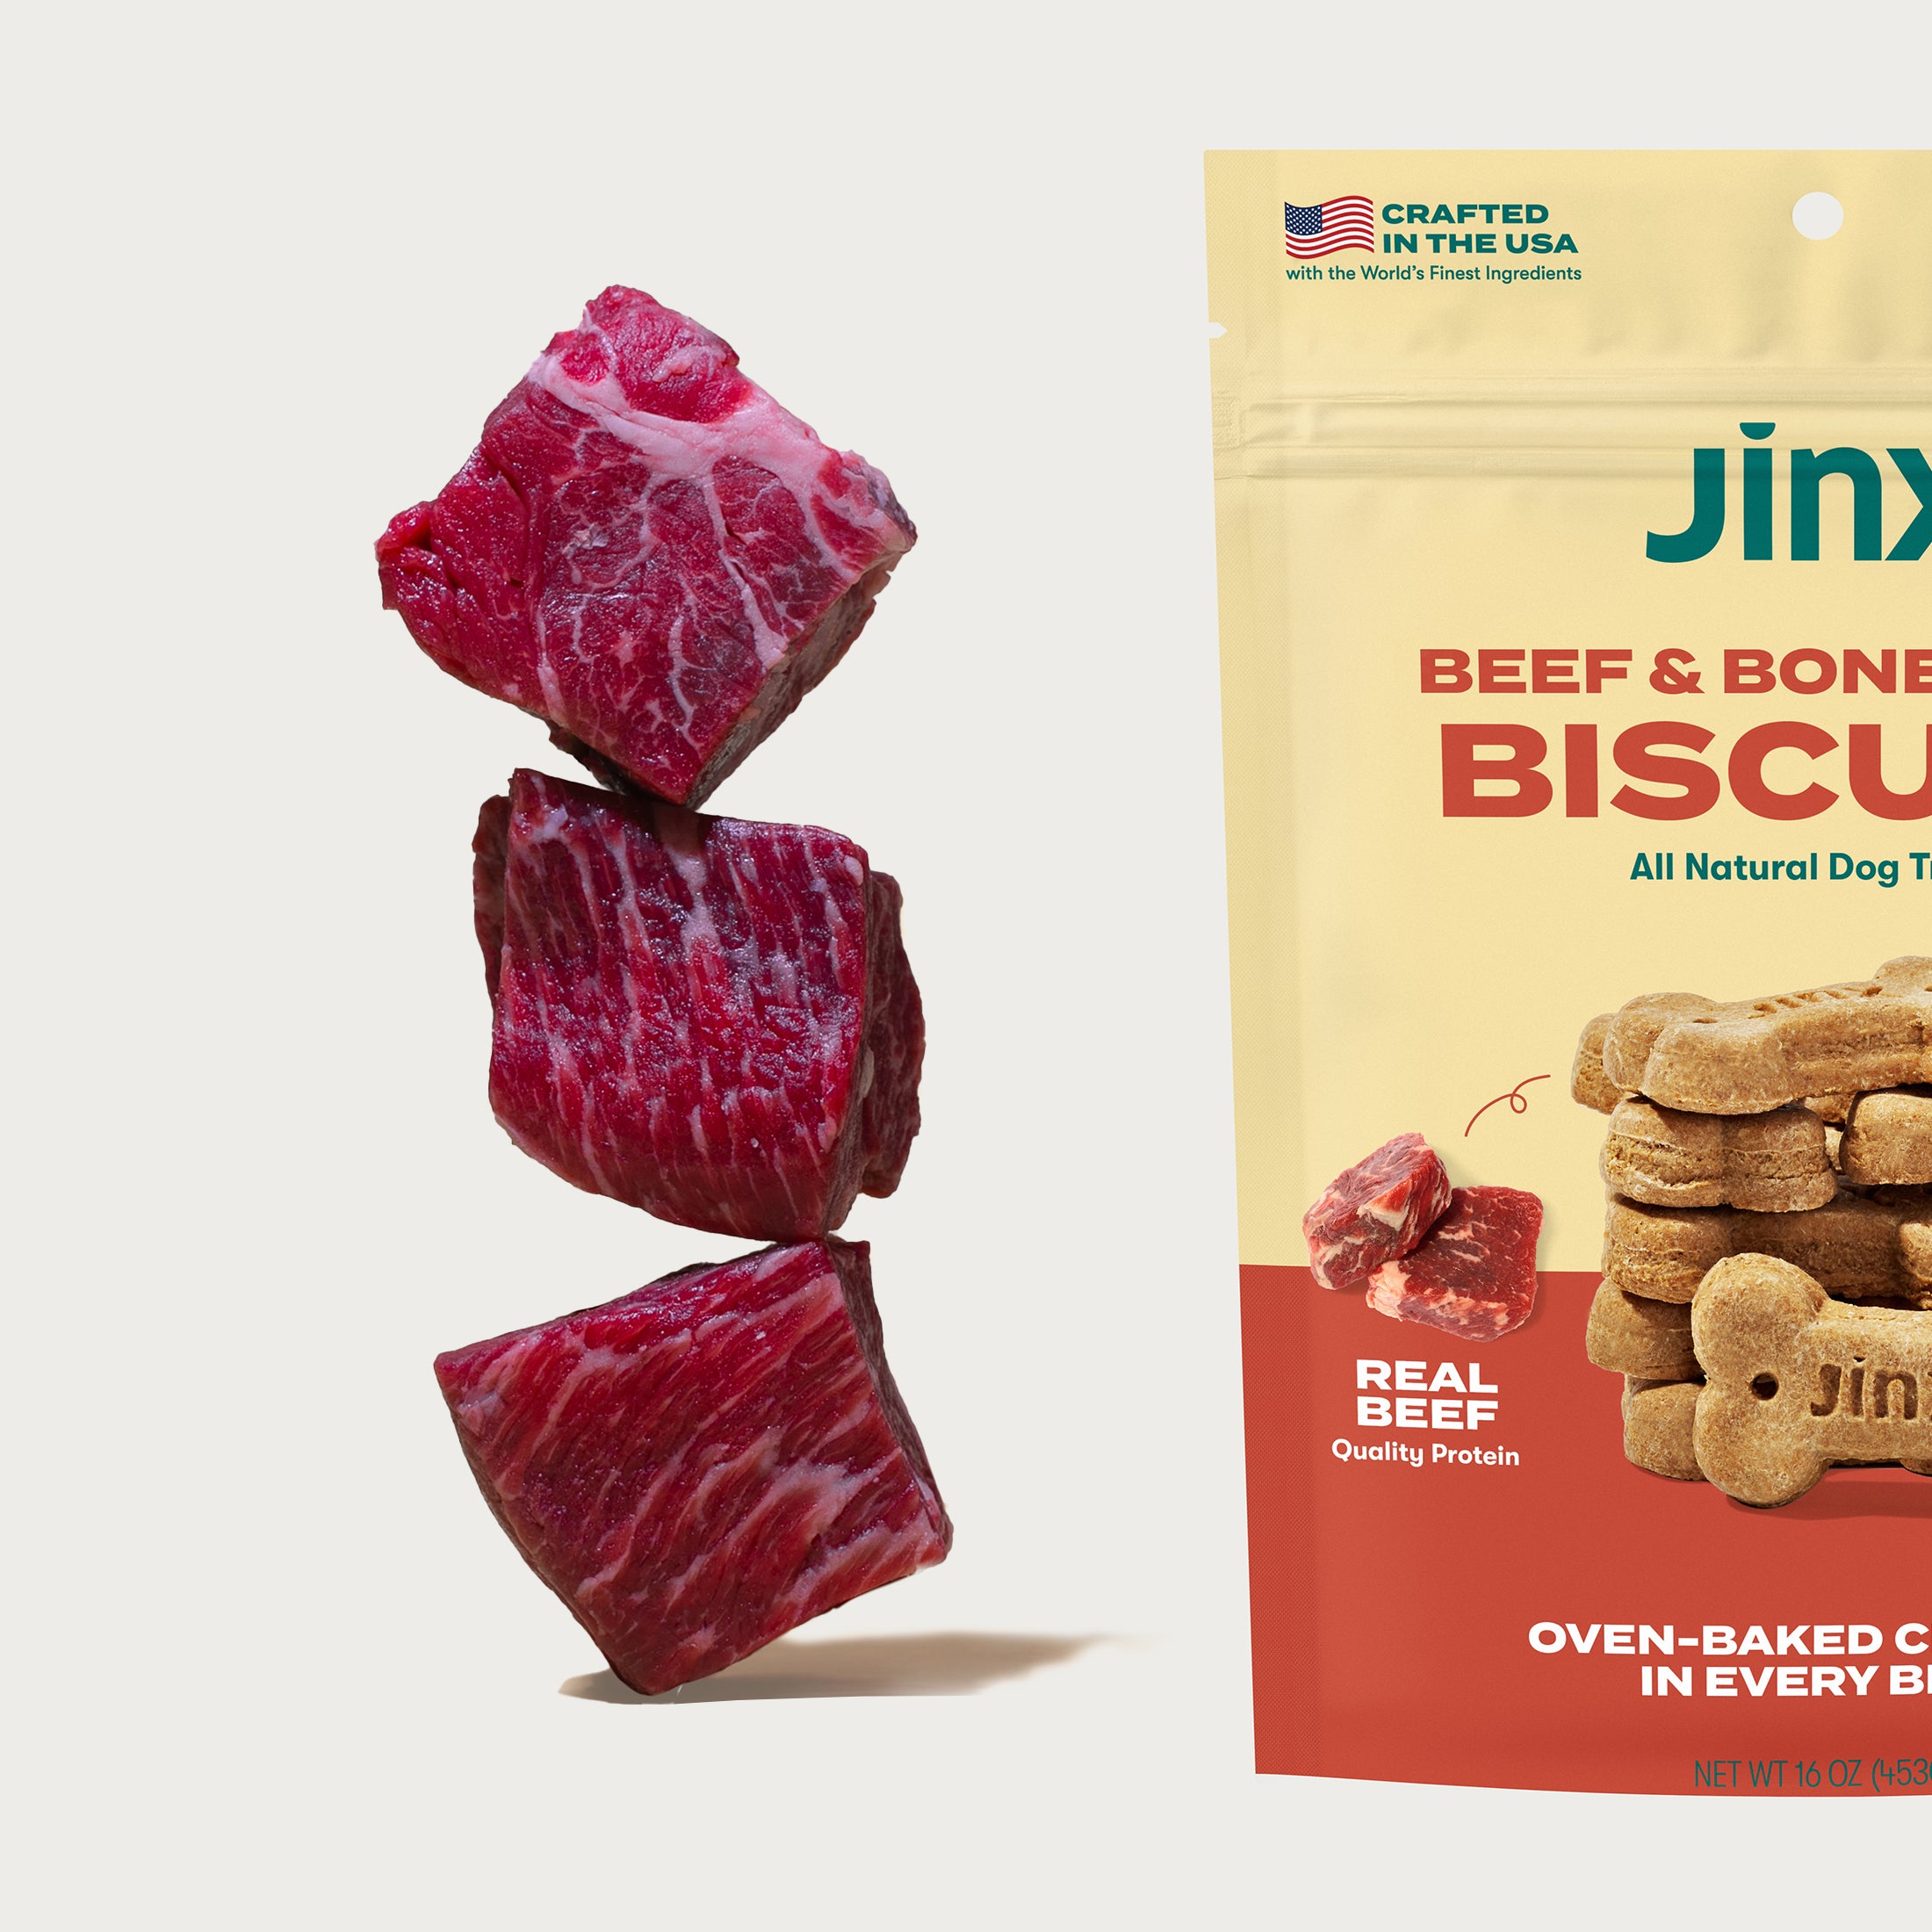 cubes of raw beef stacked on the left and image of jinx beef biscuit packaging to the right